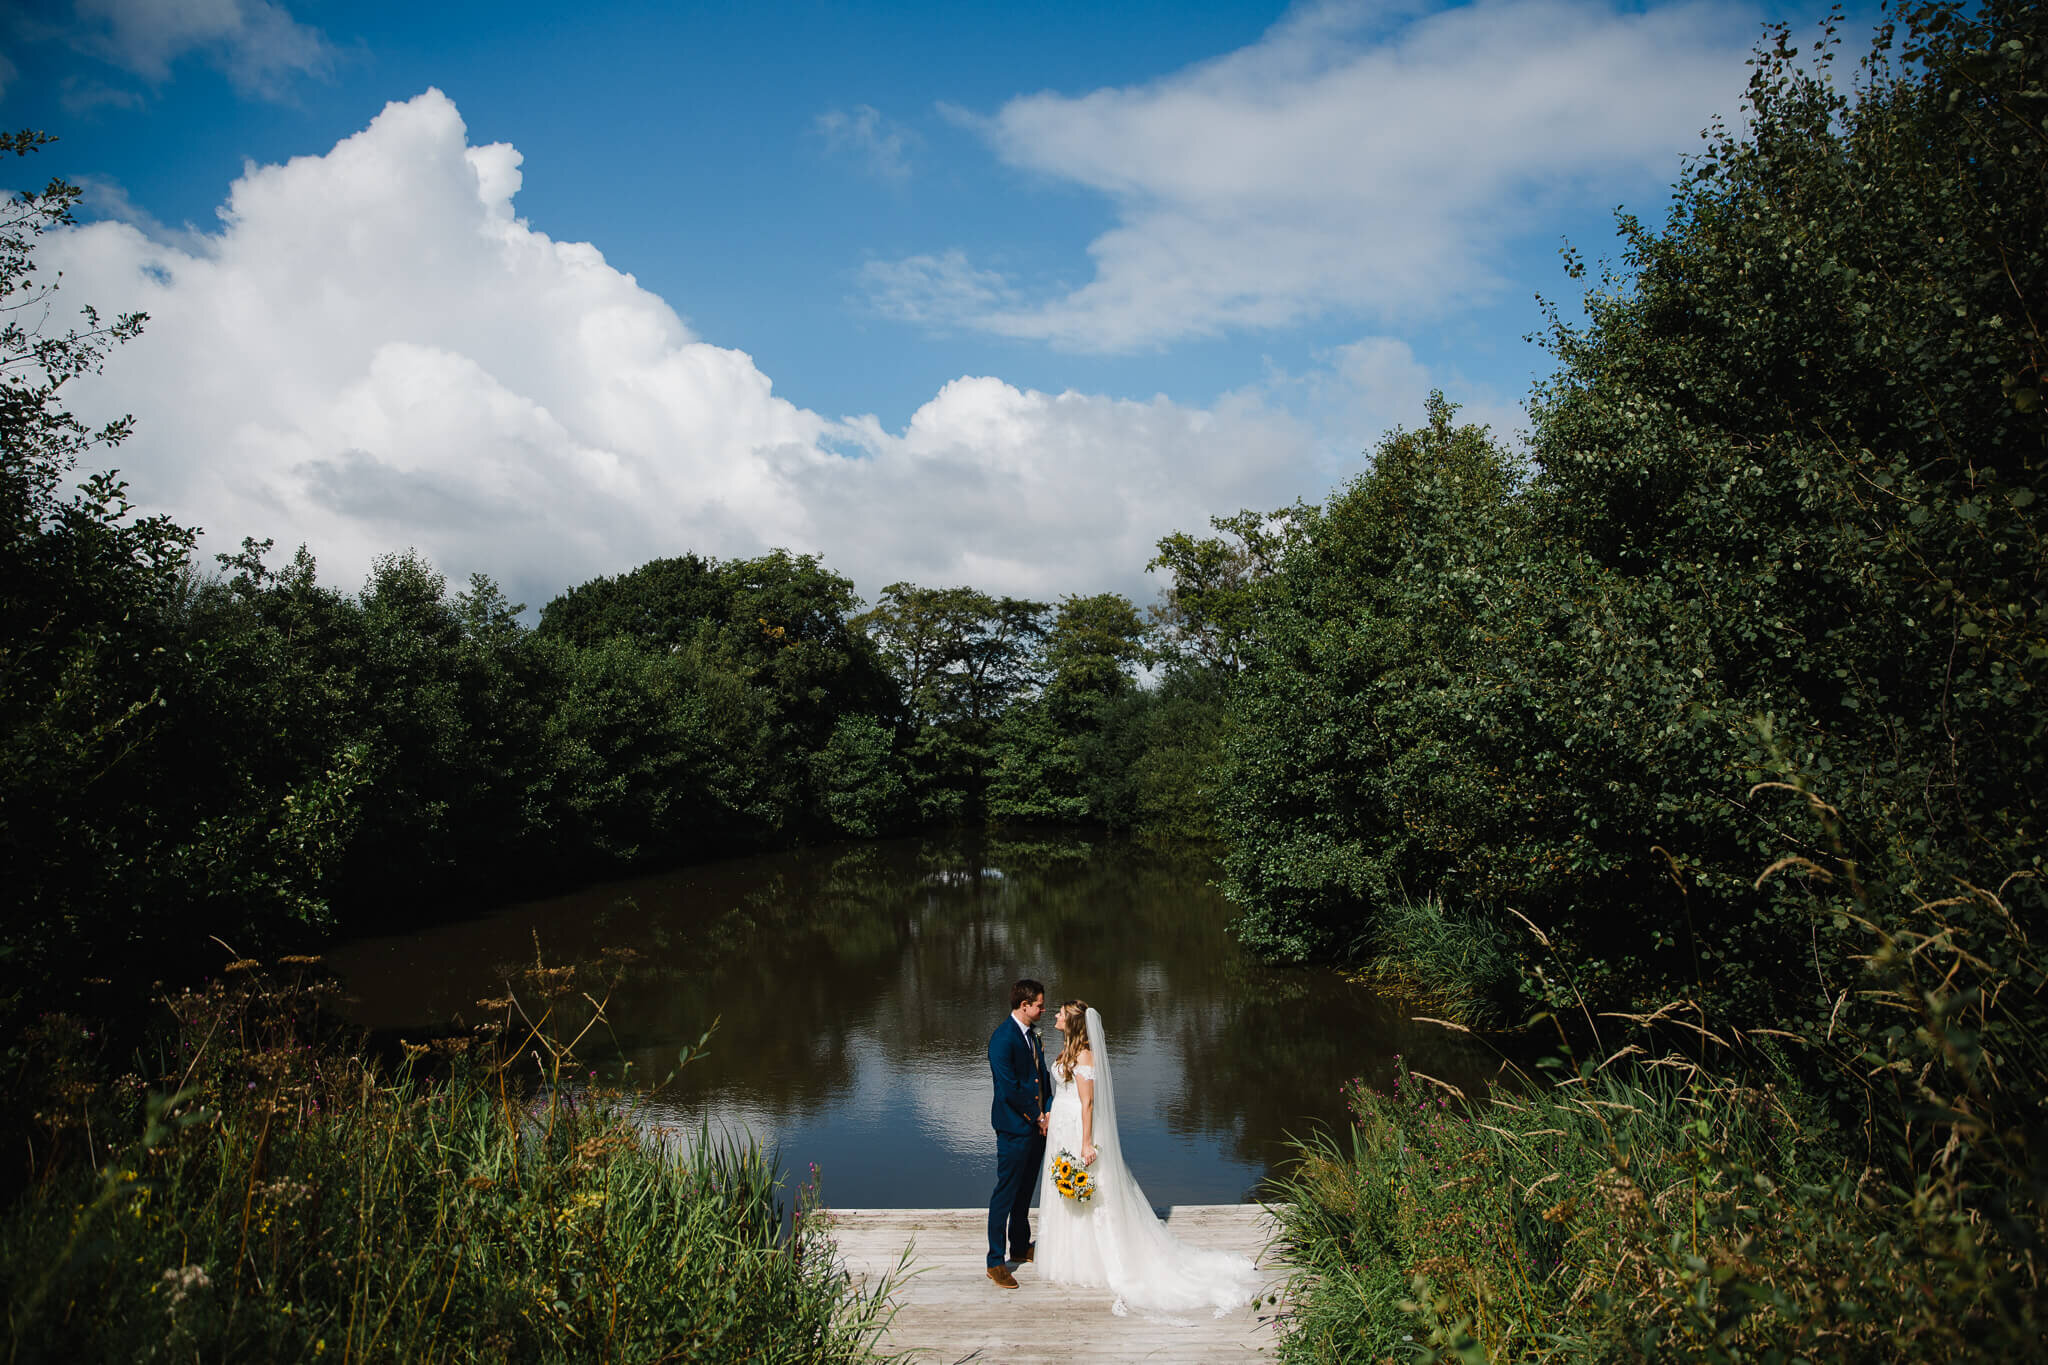 the lake is a lovely areas for portraits for bride and groom